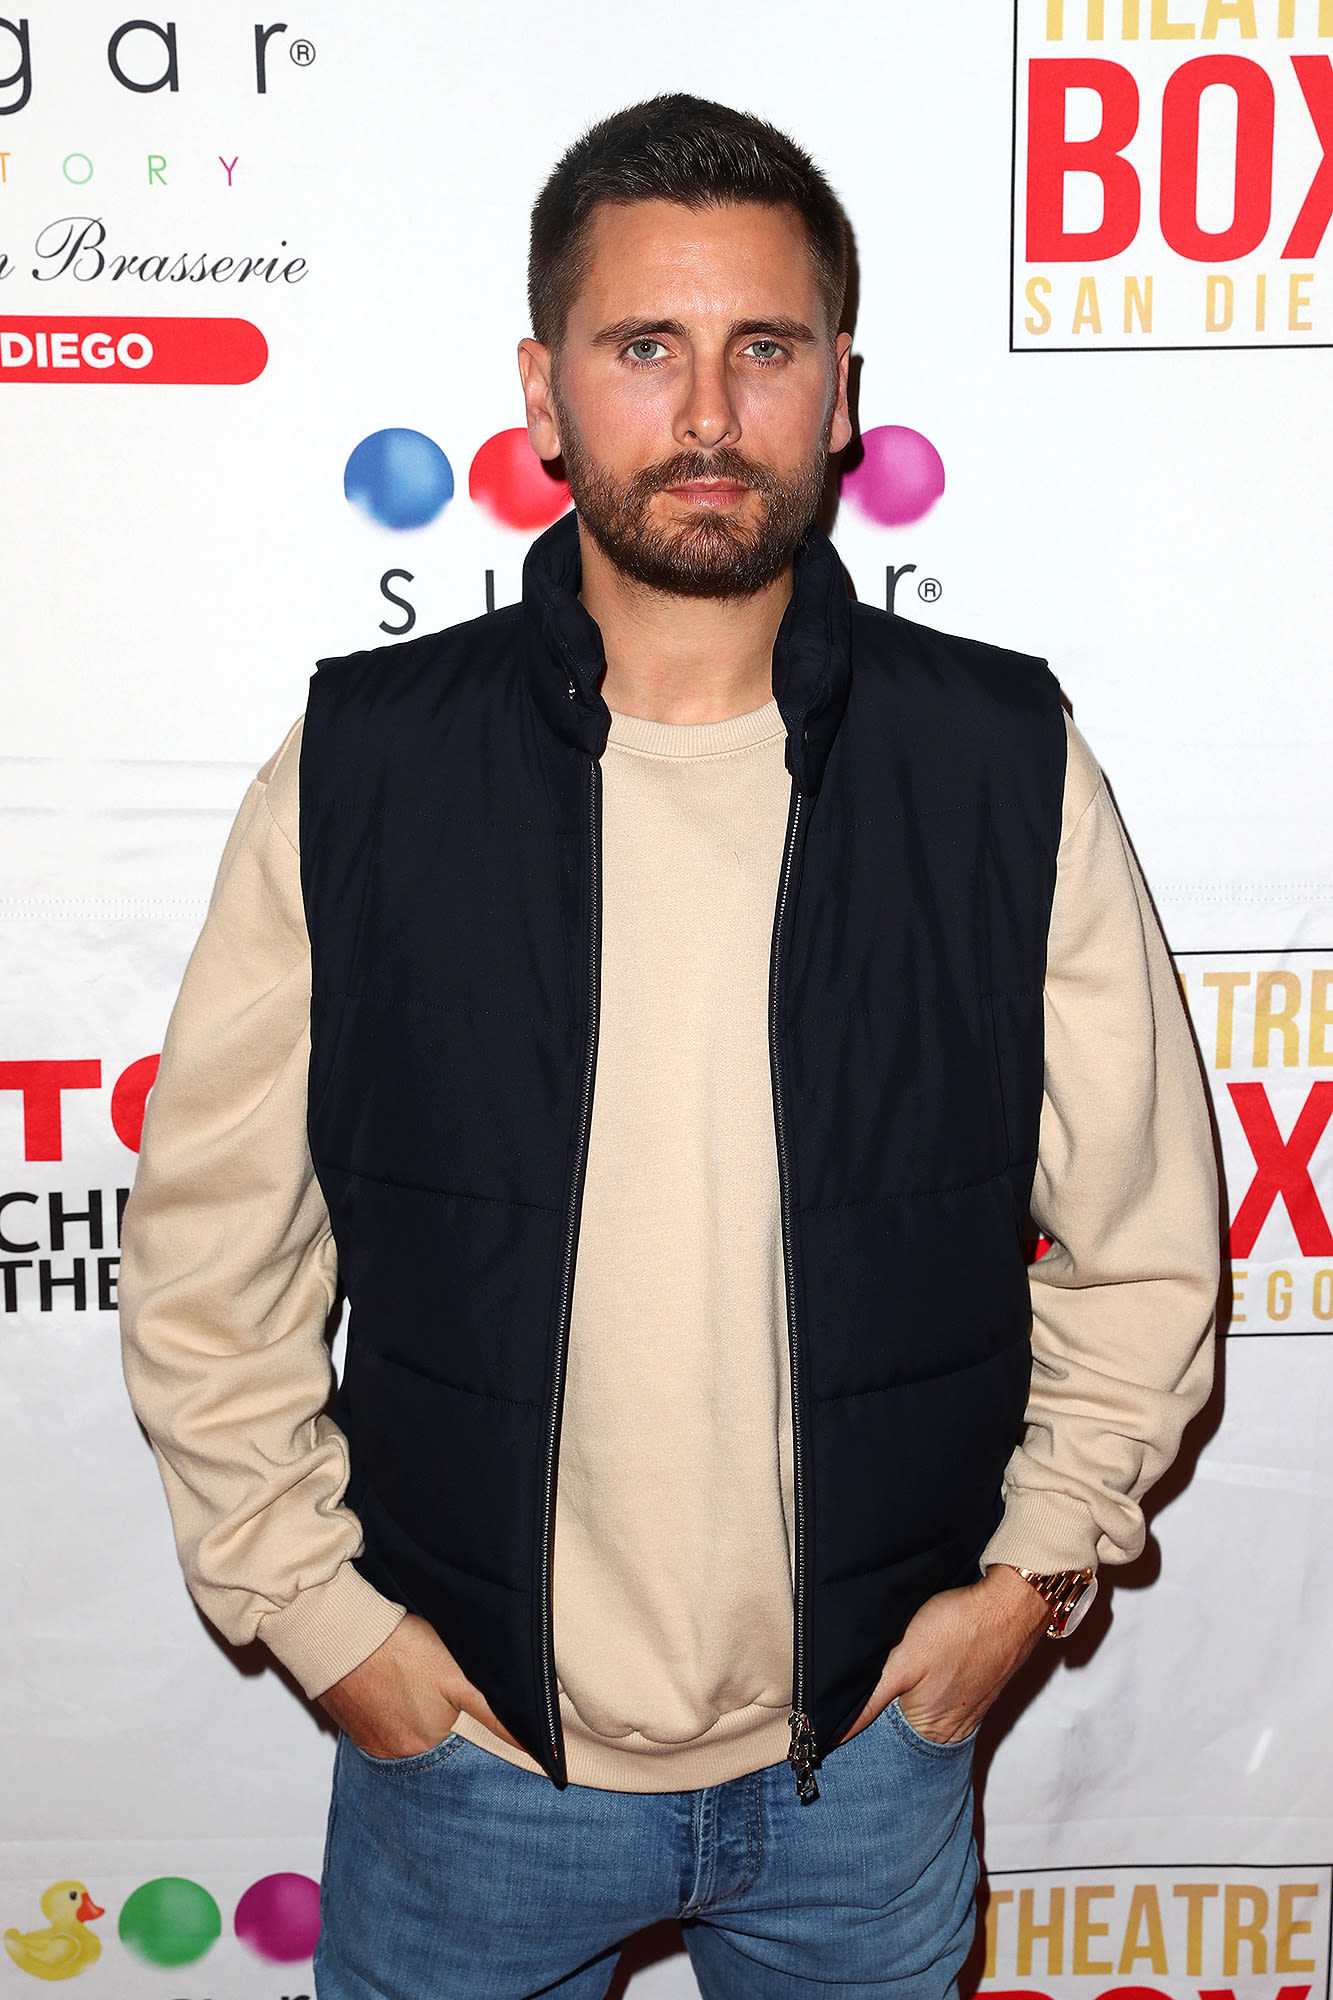 Scott Disick Gushes That Daughter Penelope, 11, Makes His ‘Life So Much Better’